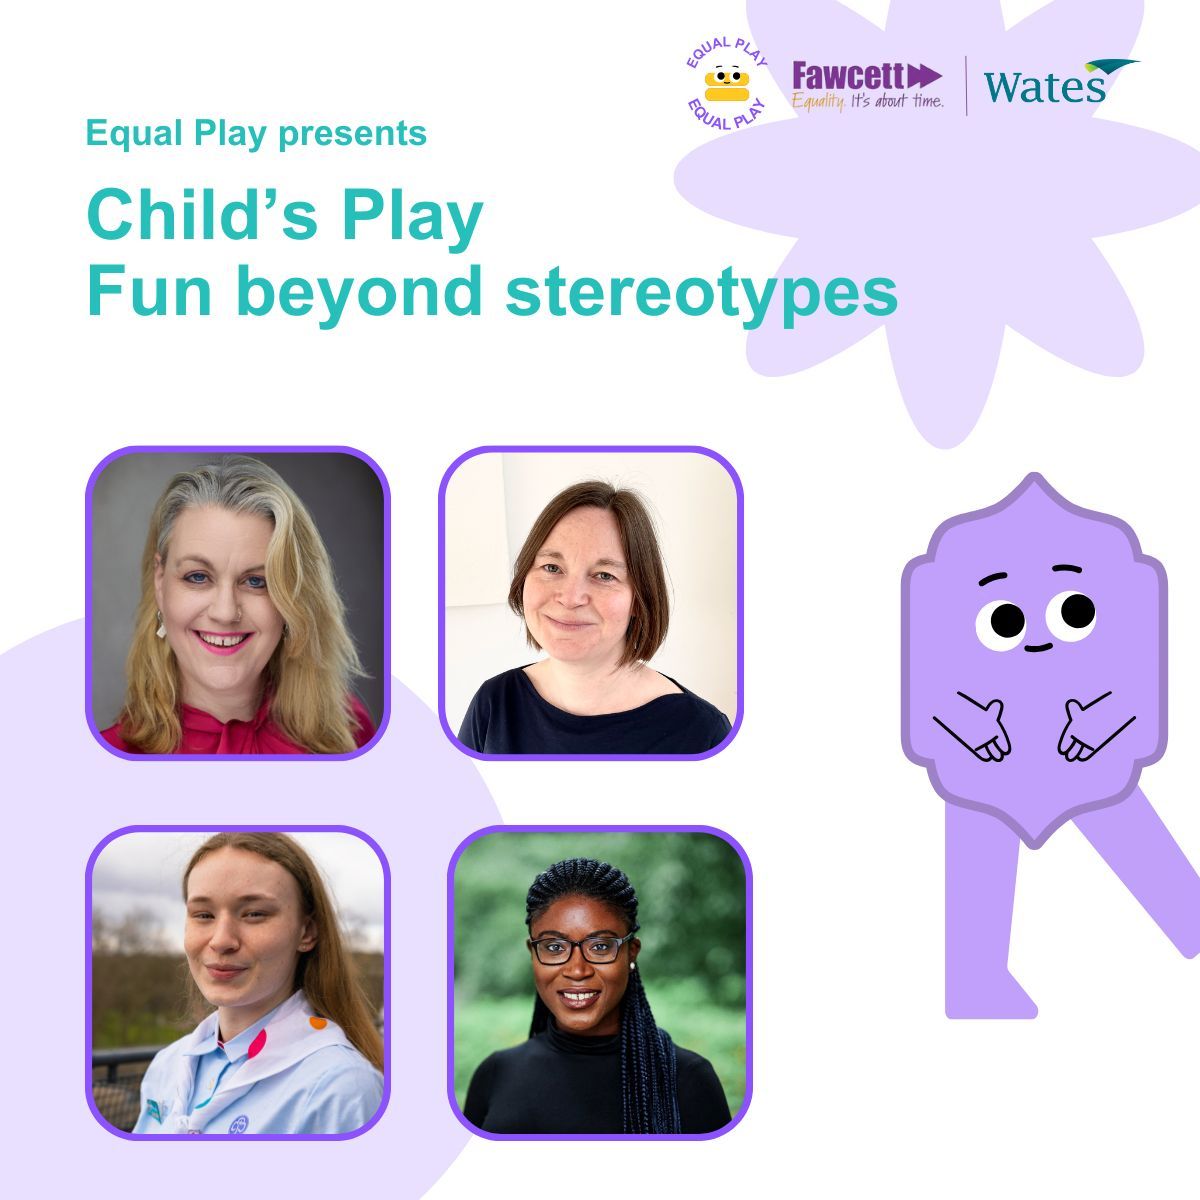 Did you miss our online event Child's Play: Fun Beyond Stereotypes last week? Part of our Equal Play series with @WatesGroup, our speakers explored how to support children to enjoy play beyond the barriers of stereotypes. Watch the recording online now: buff.ly/40rWMsW